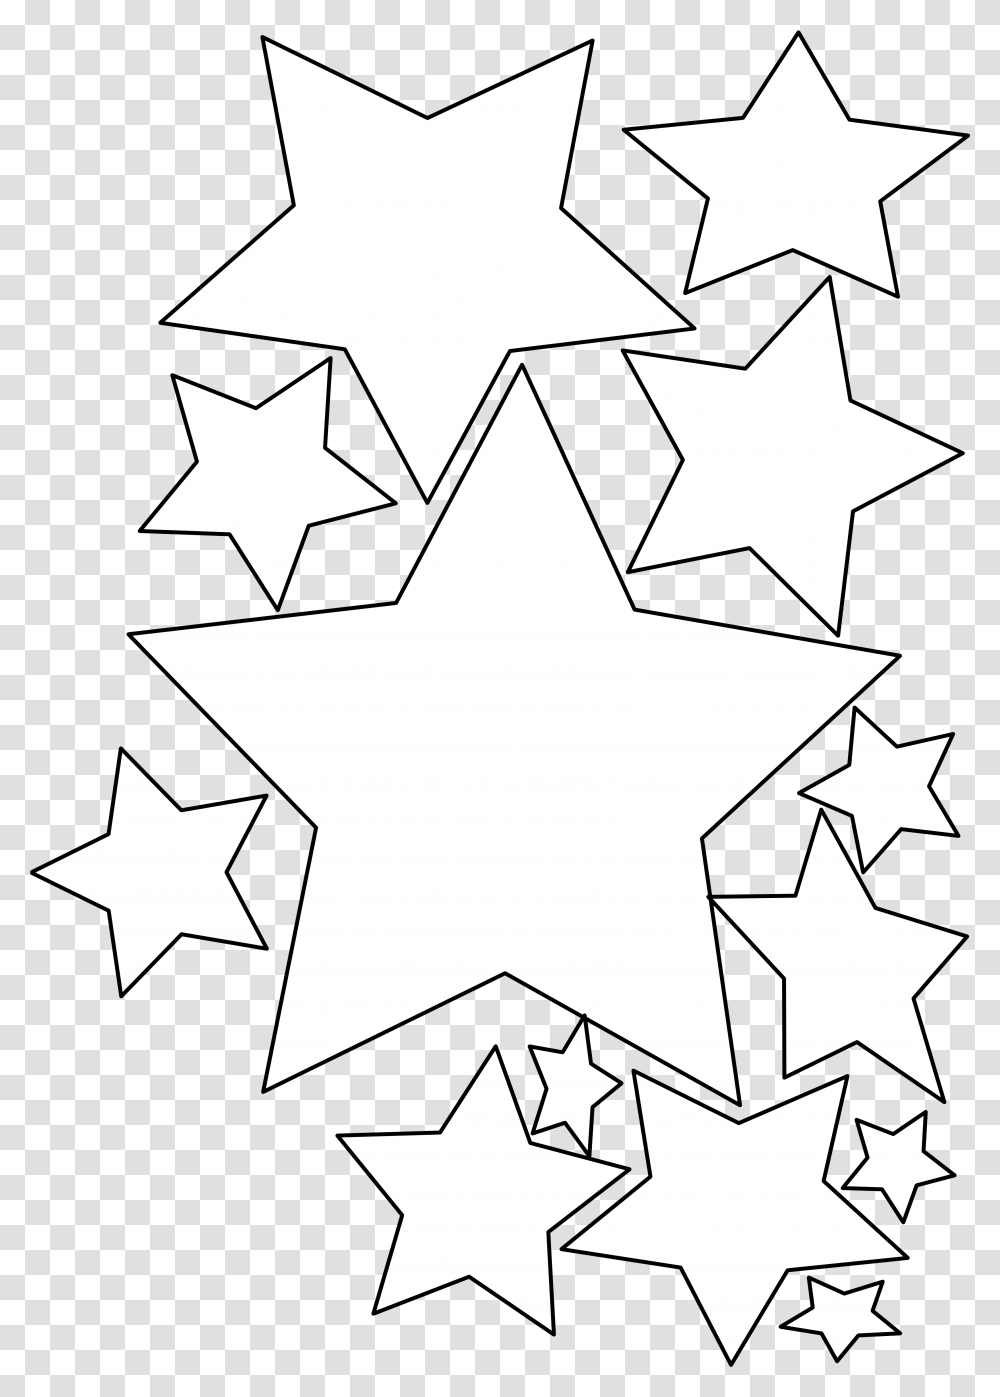 Library Of Black Shooting Star Graphic Freeuse White On Black Clipart, Symbol Transparent Png